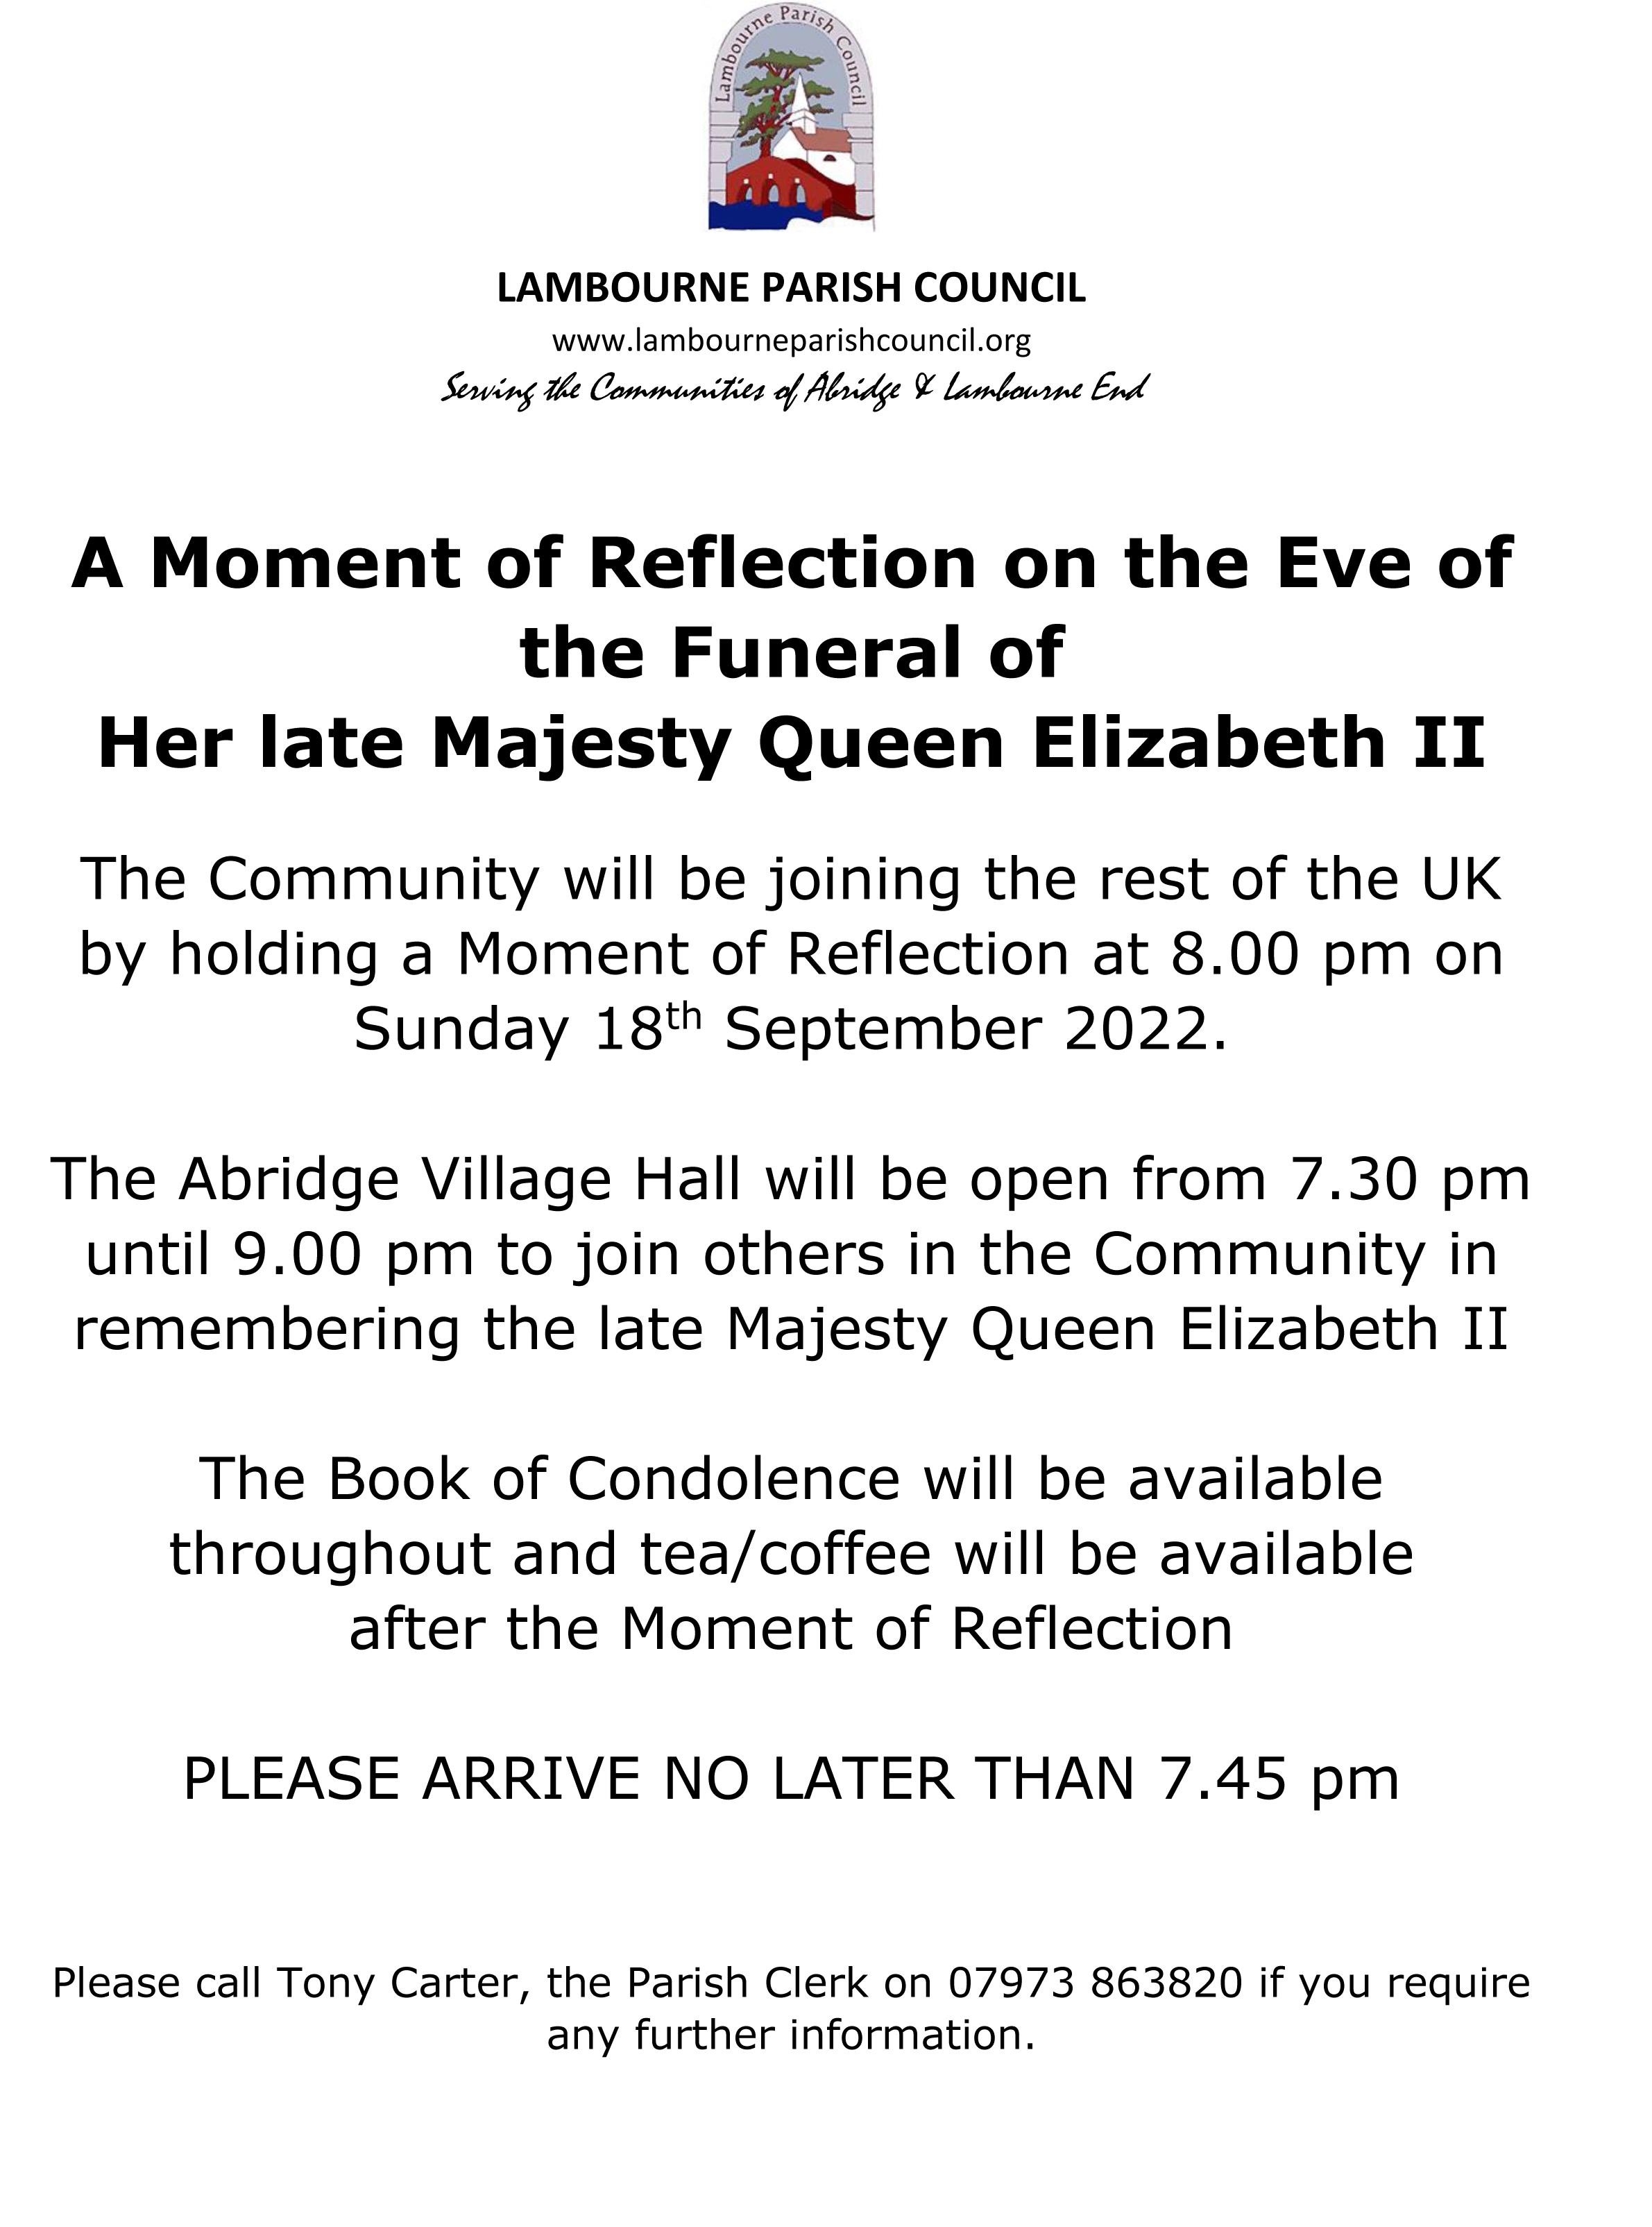 A Moment of Reflection for Her Majesty Queen Elizabeth II